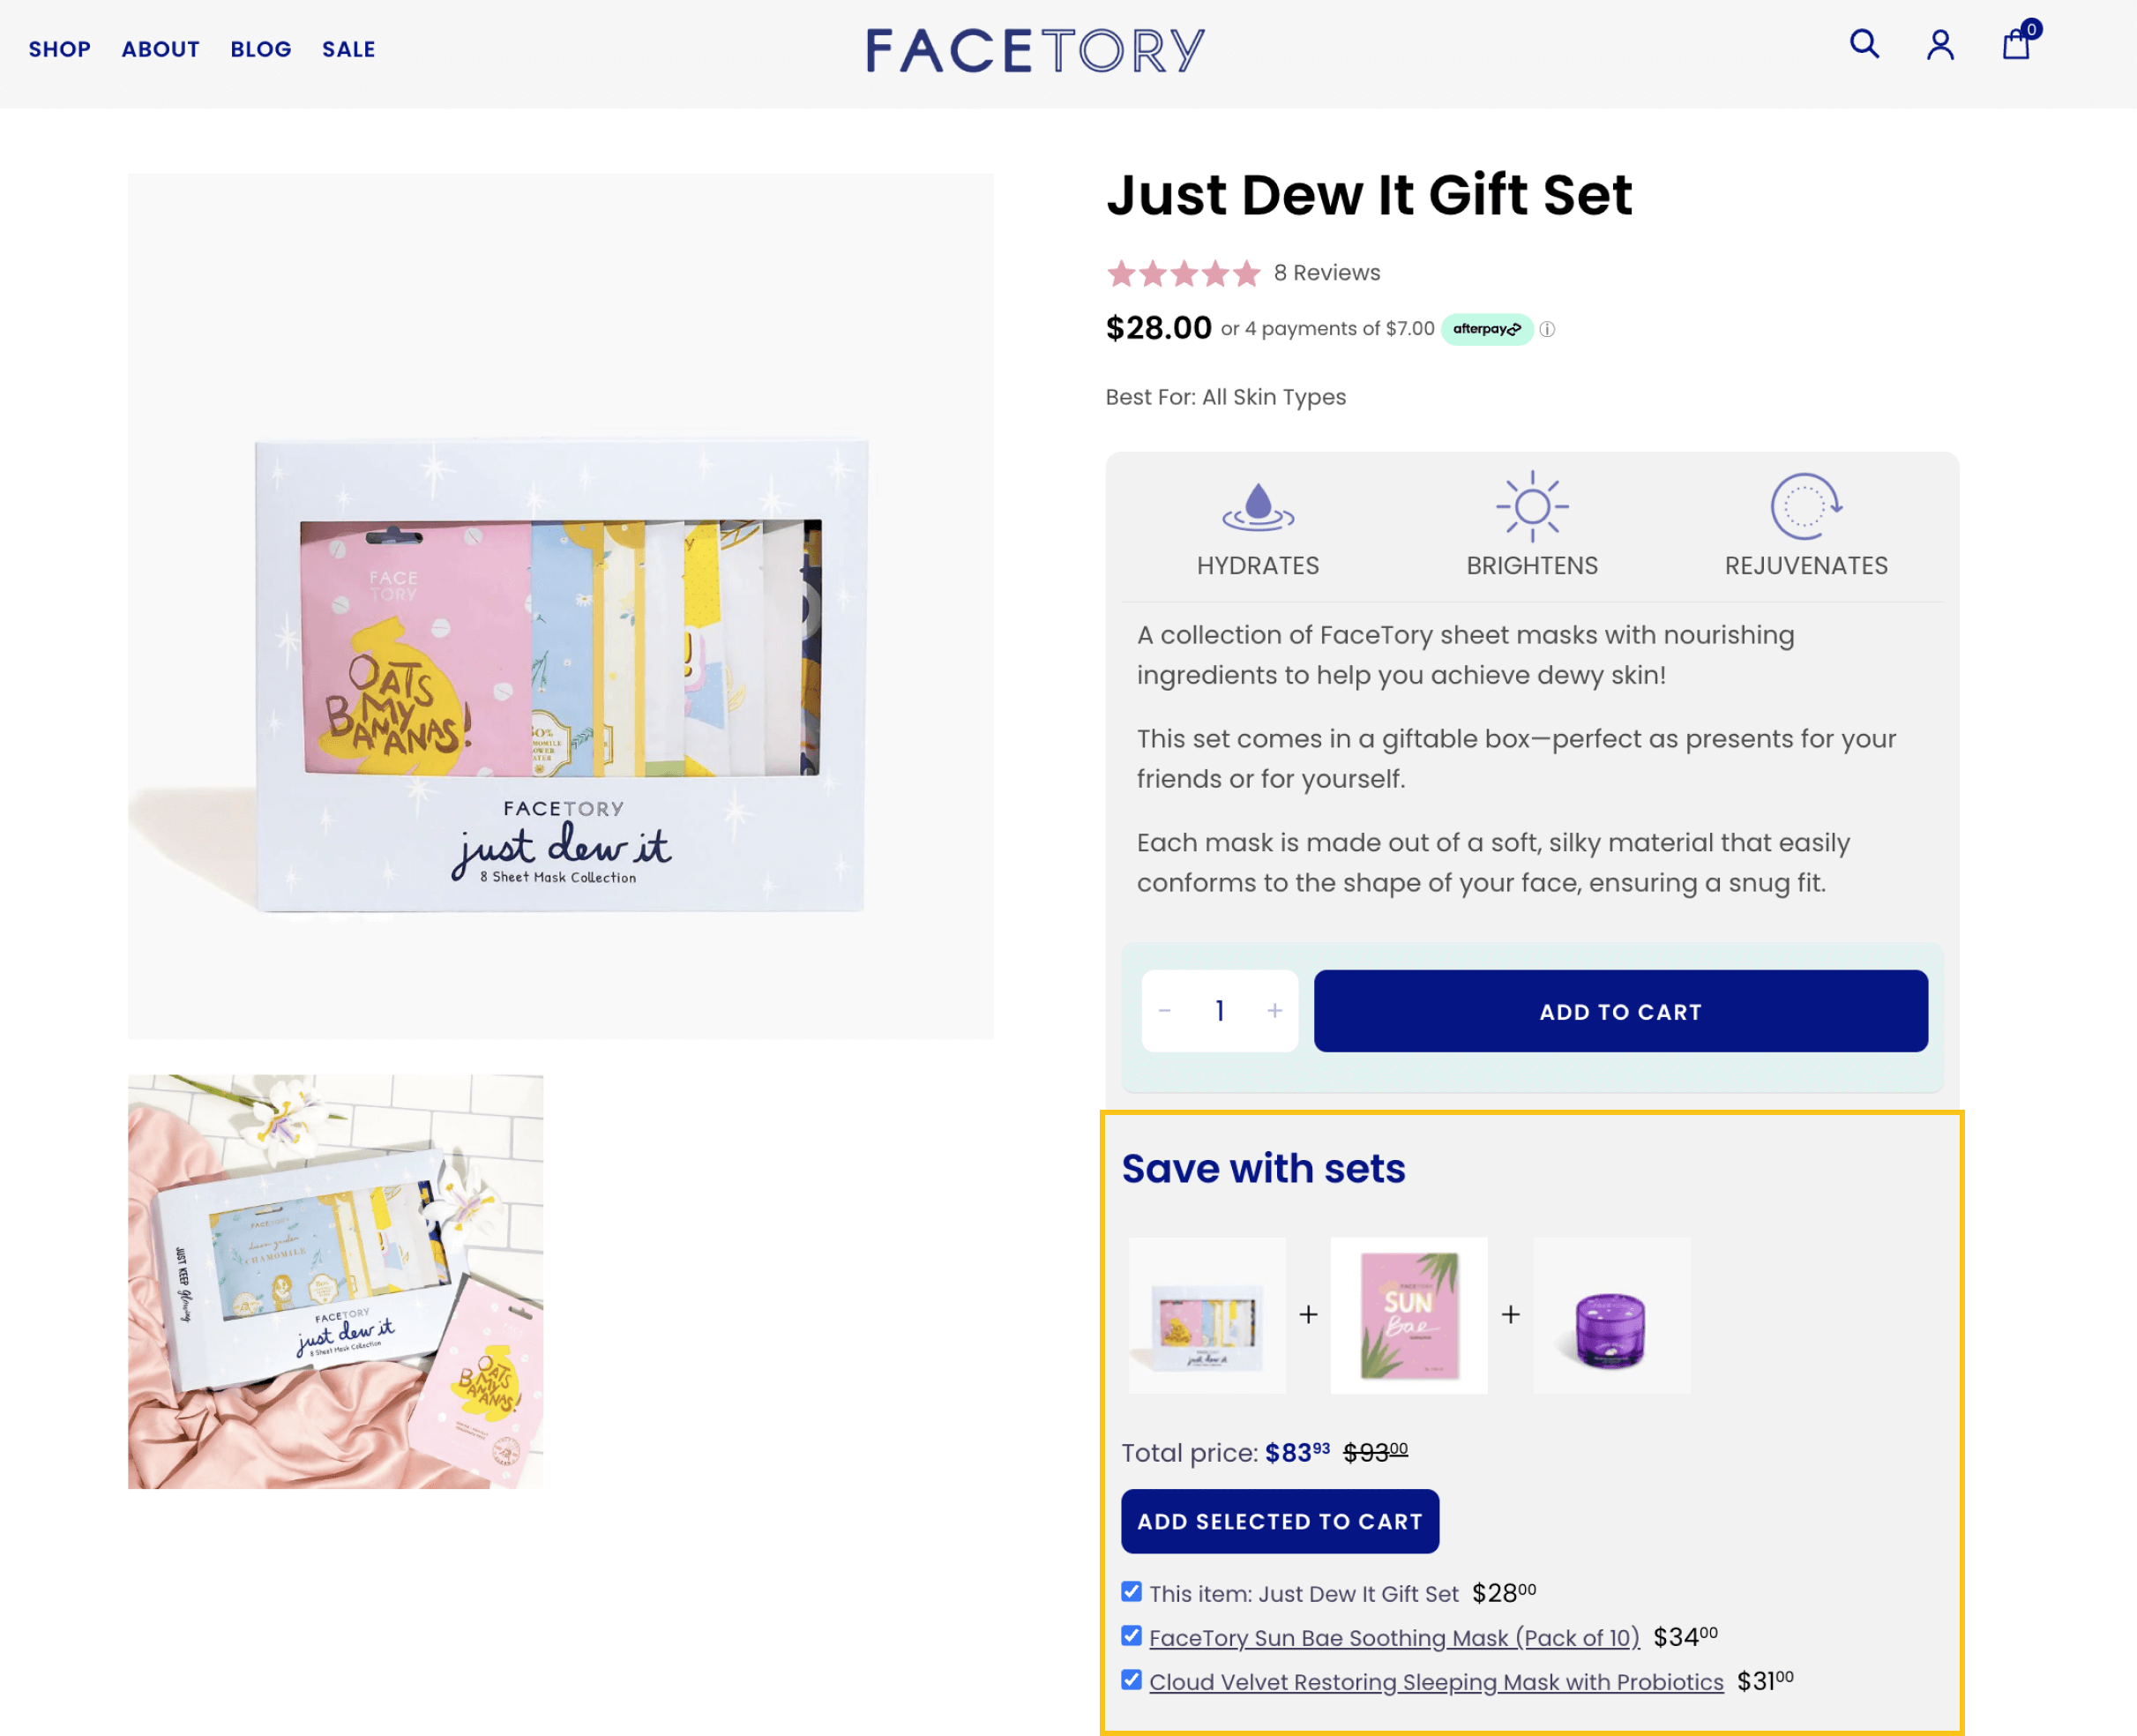 A screenshot of FaceTory’s Just Dew It Gift Set product page. Under the product description, there is a section titled: Save with Sets. It lists 2 other products—FaceTory Sun Bae Soothing Mask for $34 and Cloud Velvet Restoring Sleeping Mask with Probiotics for $31. A customer can click or unclick a checkbox and hit the Add Selected to Cart button. In the image, all items are clicked and the price is reduced to $83.93 from $93. 